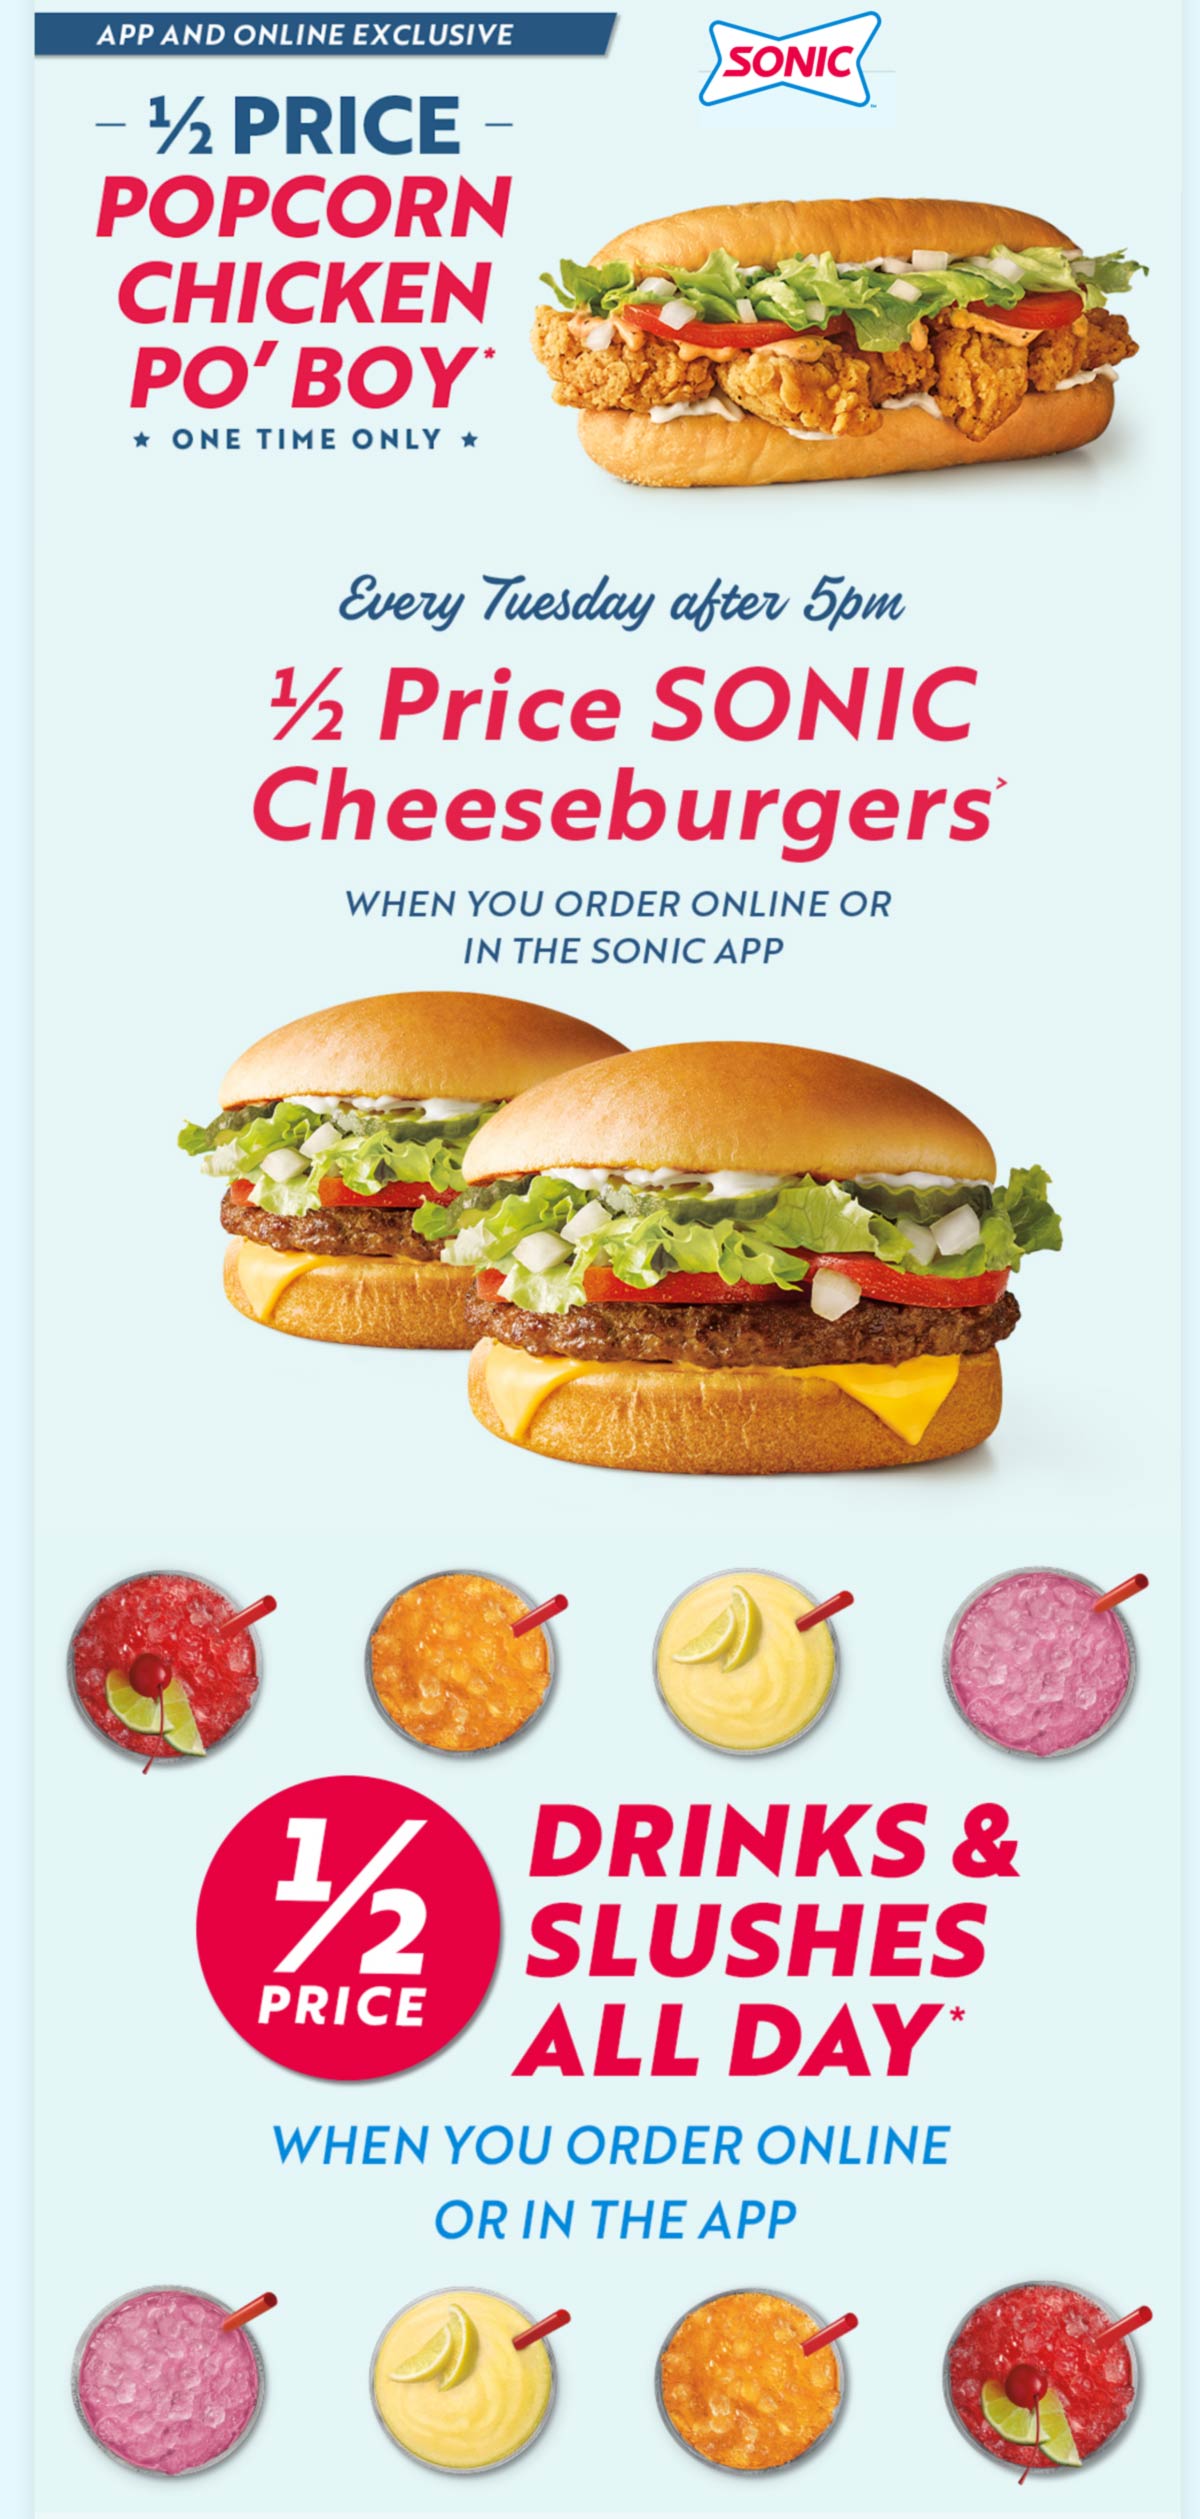 Sonic Drive-In restaurants Coupon  50% off po boy sandwich & on Tuesdays cheeseburgers after 5p at Sonic Drive-In #sonicdrivein 